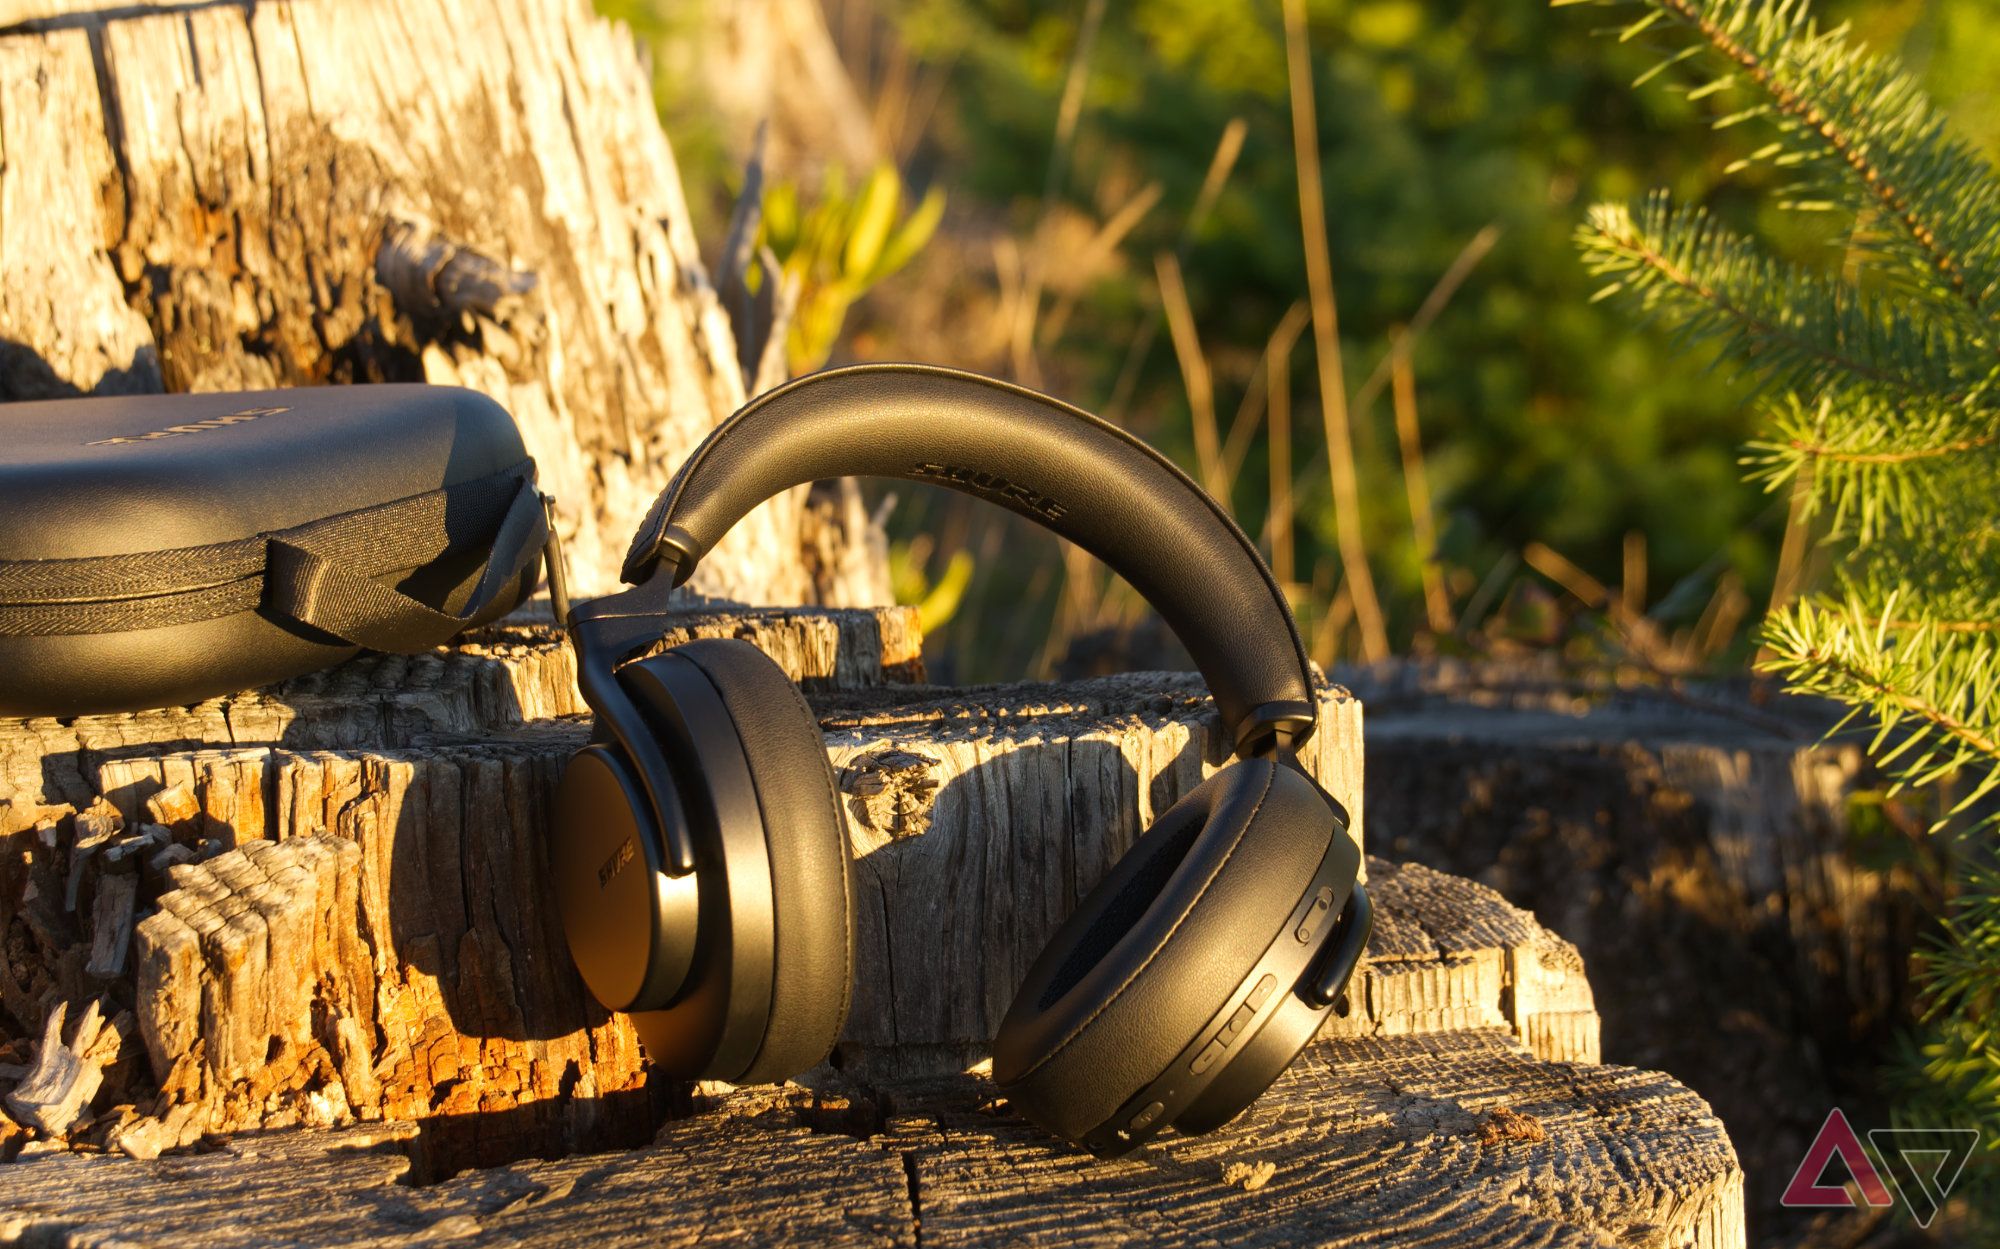 Shure Aonic 50 Gen 2 headphones and case sitting on a stump